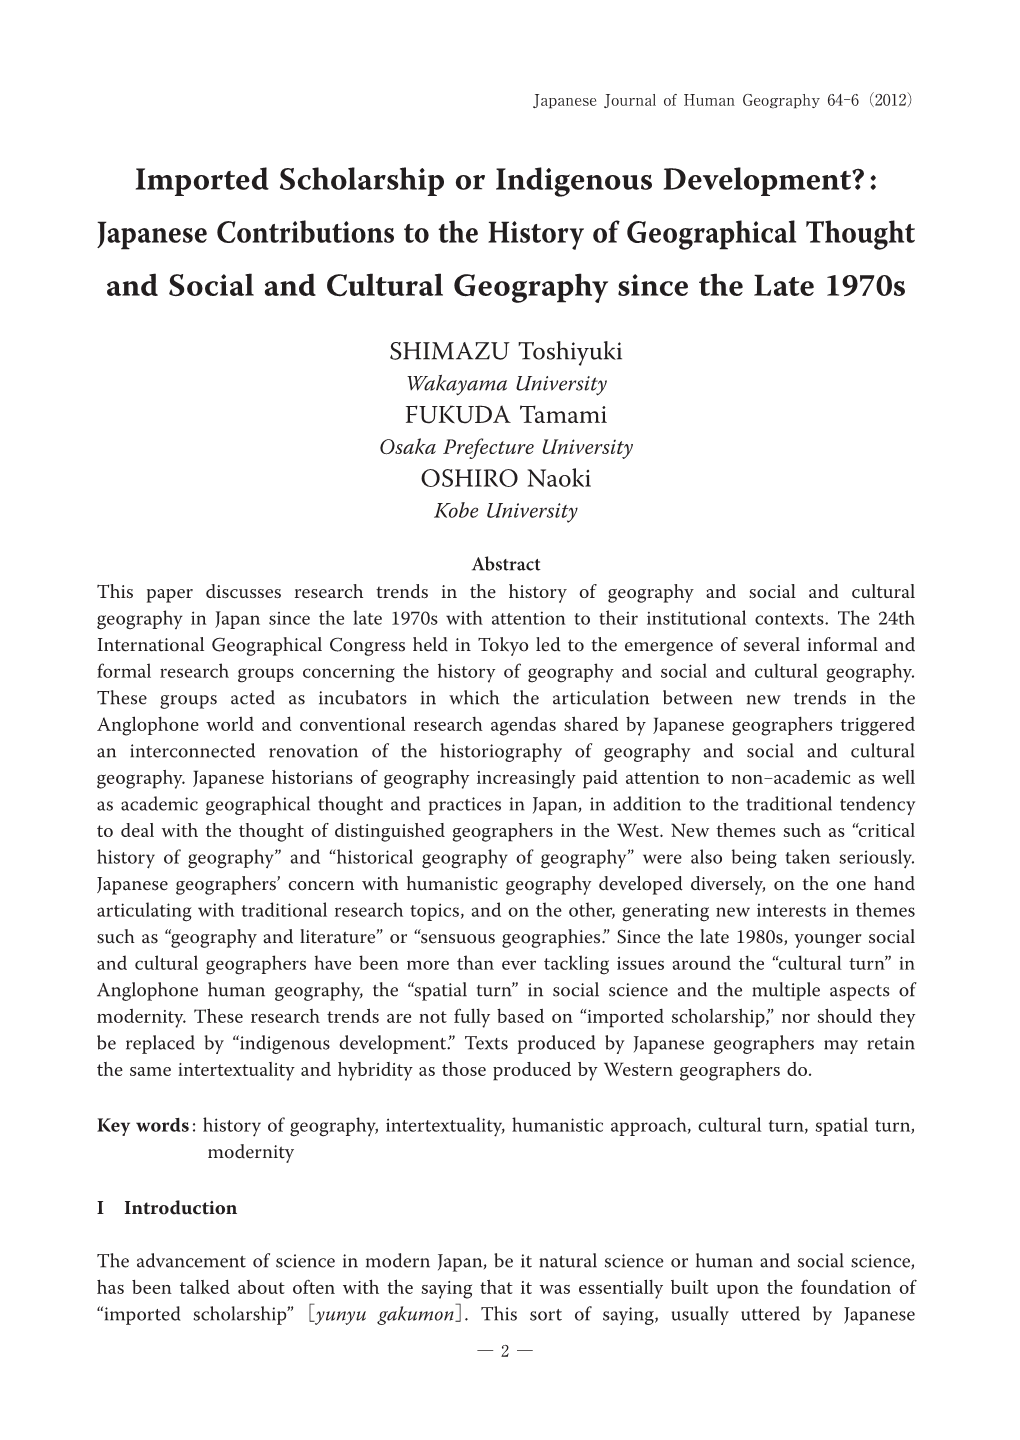 Japanese Contributions to the History of Geographical Thought and Social and Cultural Geography Since the Late 1970S